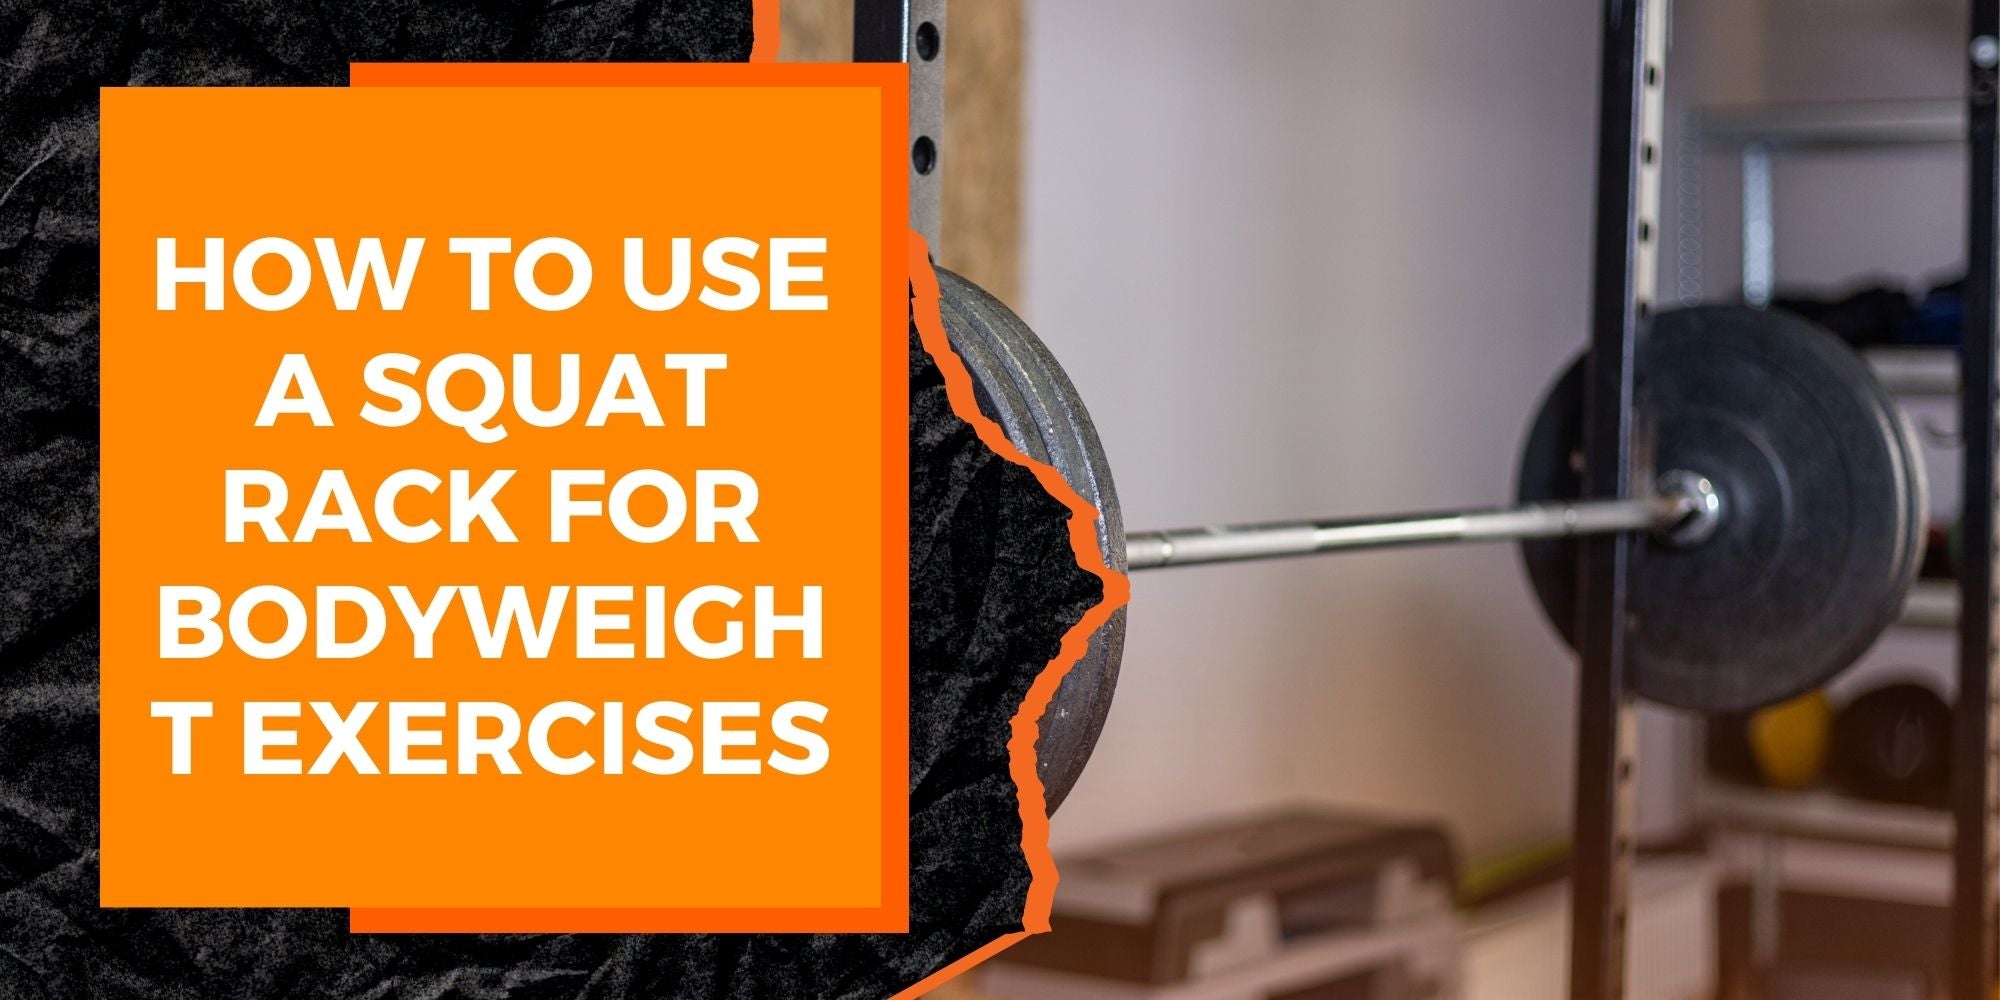 How to Use a Squat Rack for Bodyweight Exercises